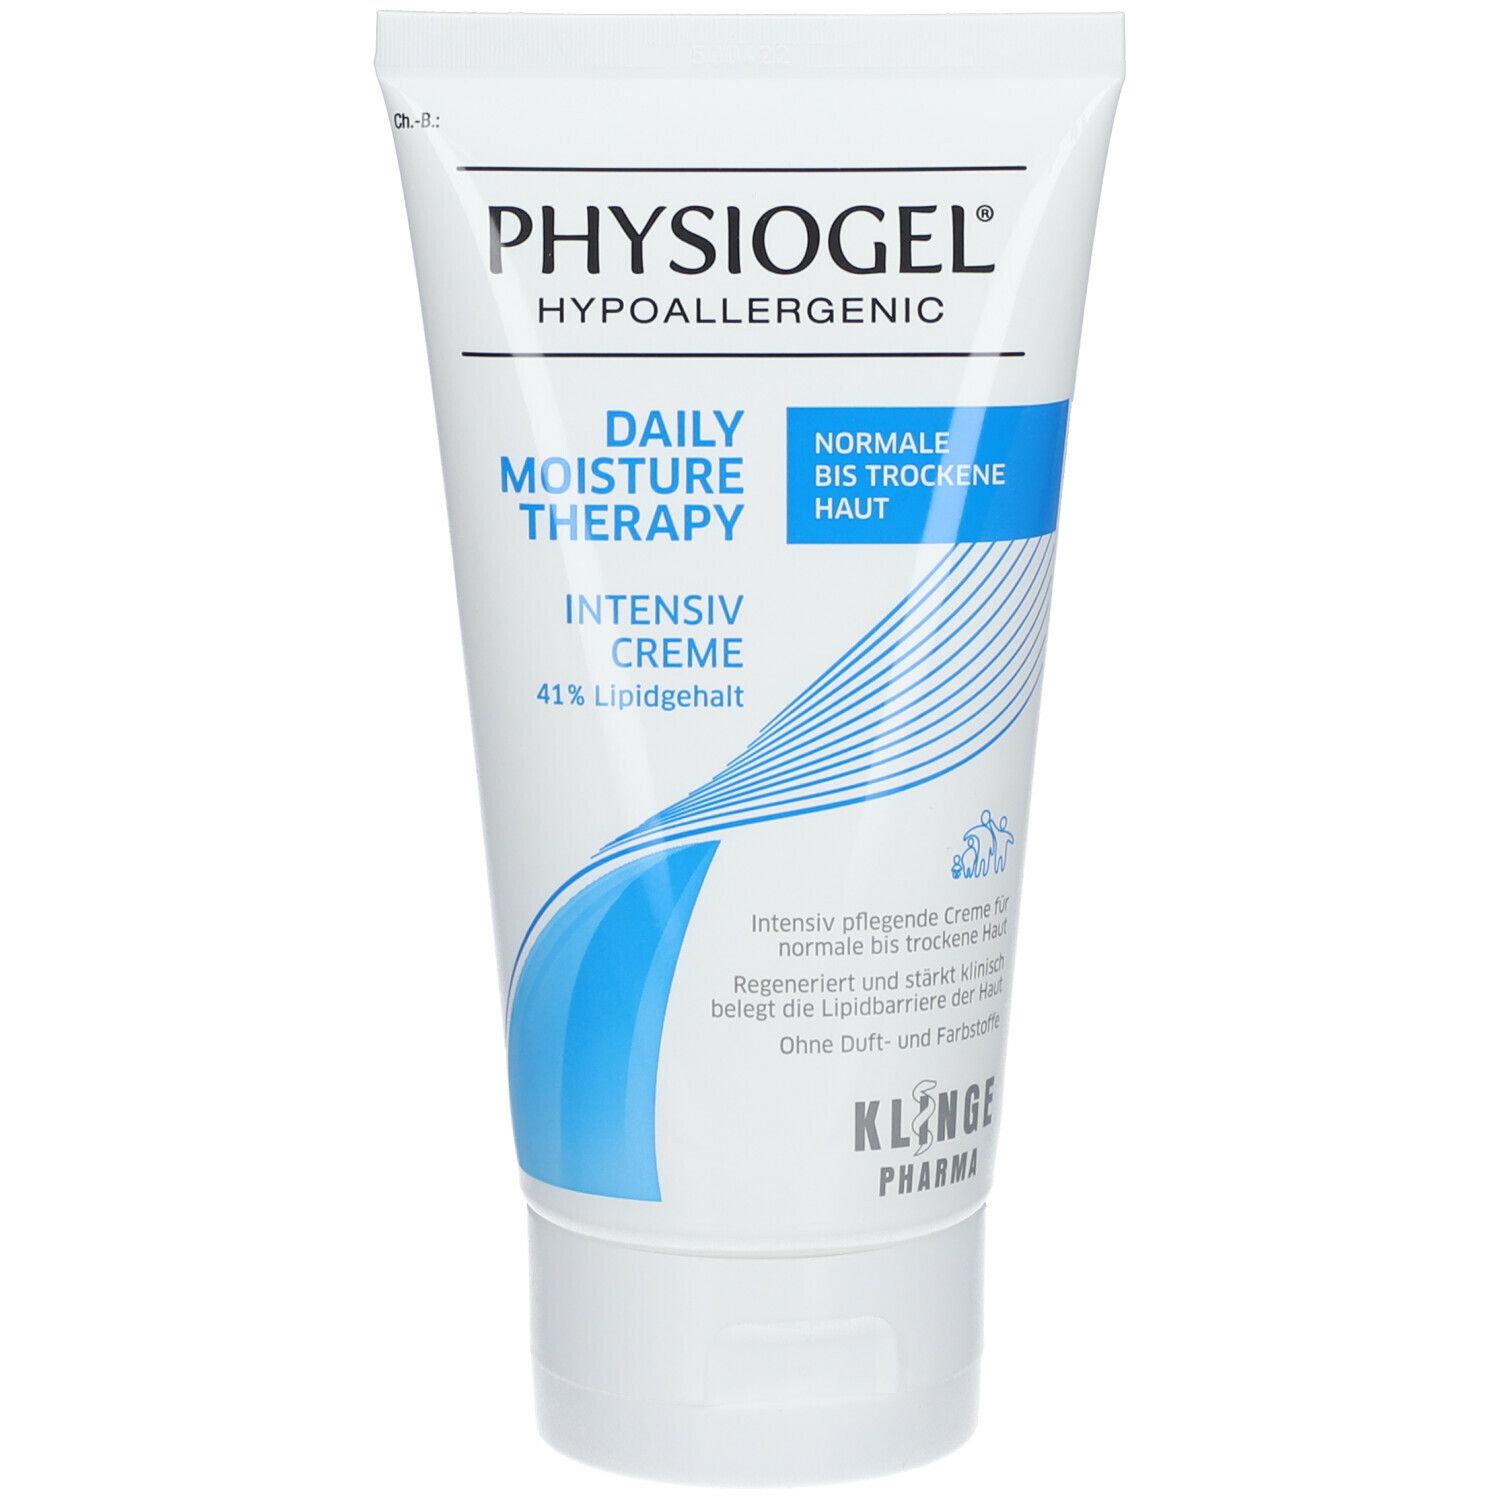 PHYSIOGEL Daily Moisture Therapy Intensiv Creme (crème hydratante quotidienne)